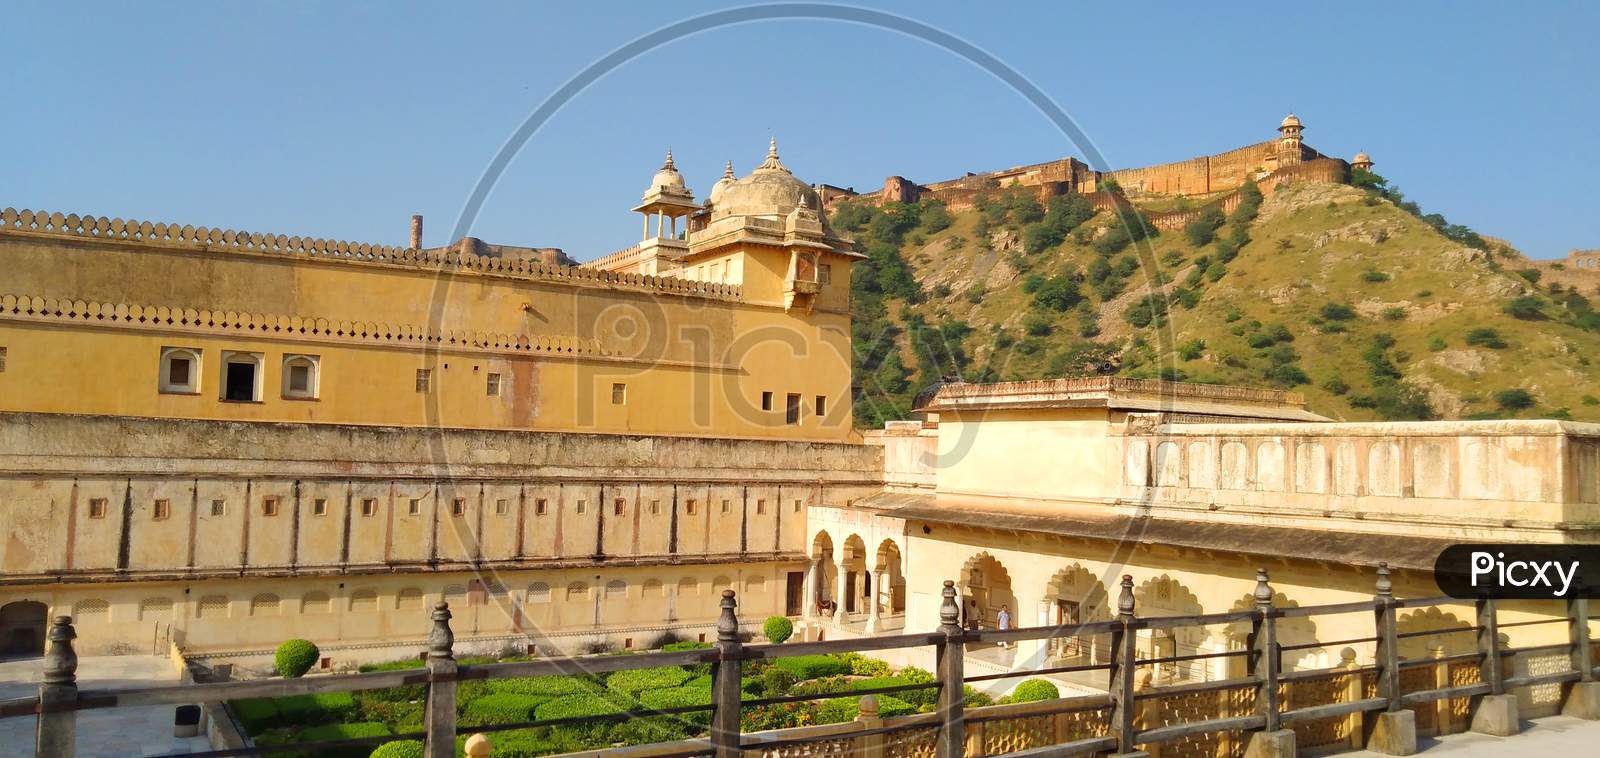 Amer Fort is a fort located in Amer, Rajasthan, India. Amer is a town with an area of 4 square kilometres located 11 kilometres from Jaipur,